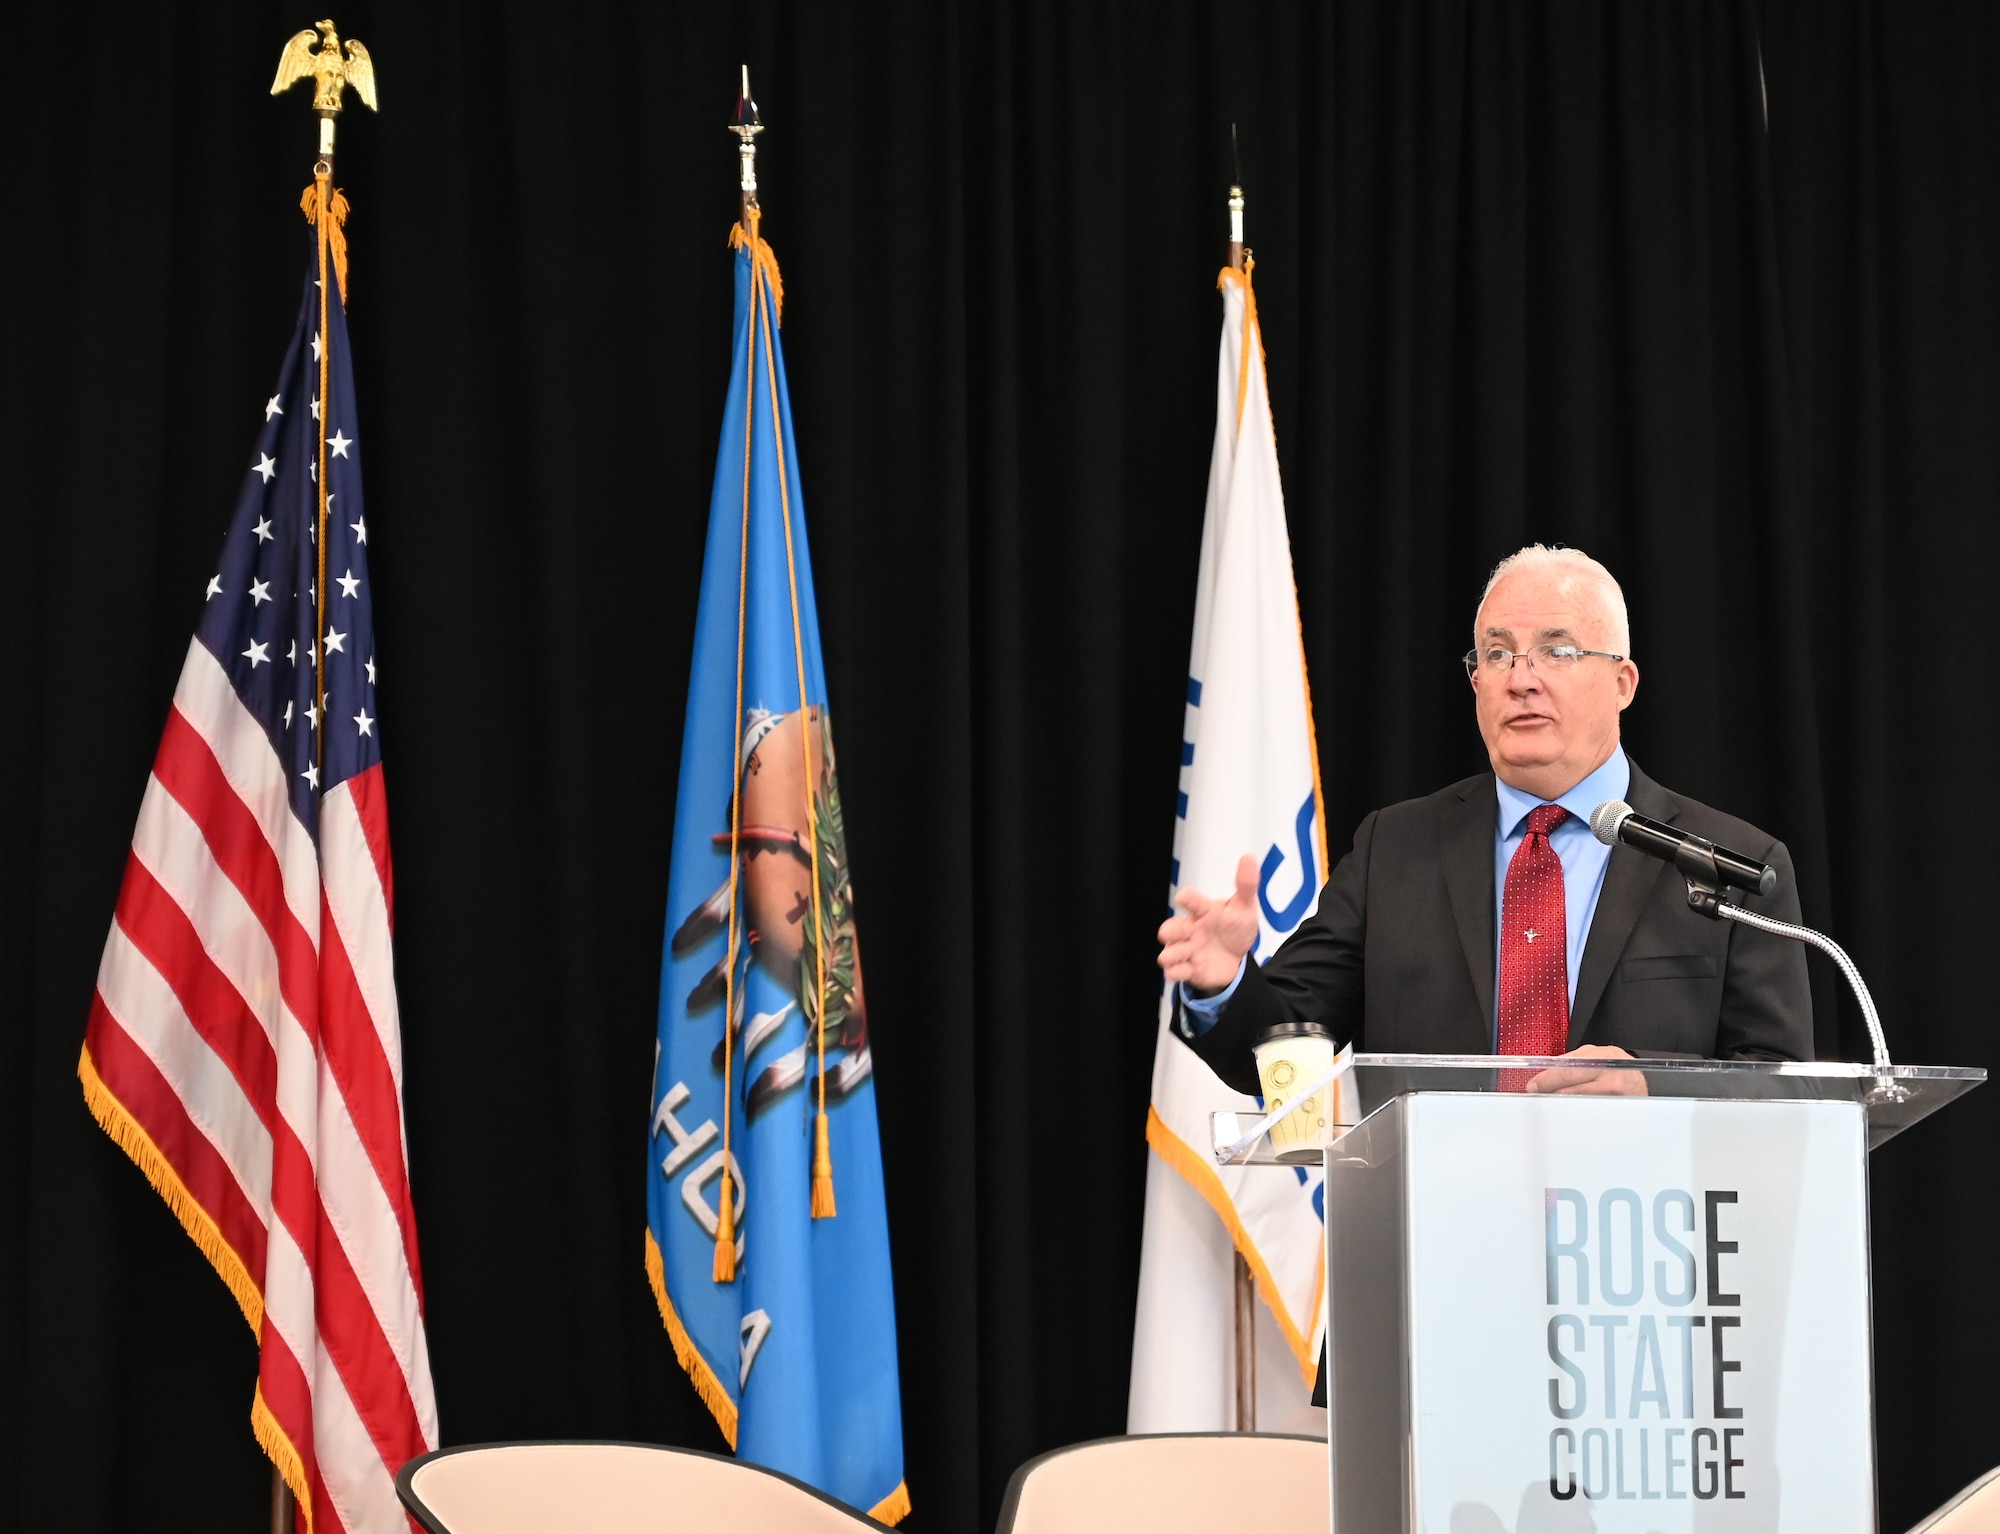 Stephen Gray, director of the 448th Supply Chain Management Wing, speaks during the Oklahoma Aerospace and Defense Industry Day May 16 at Rose State College in Midwest City.